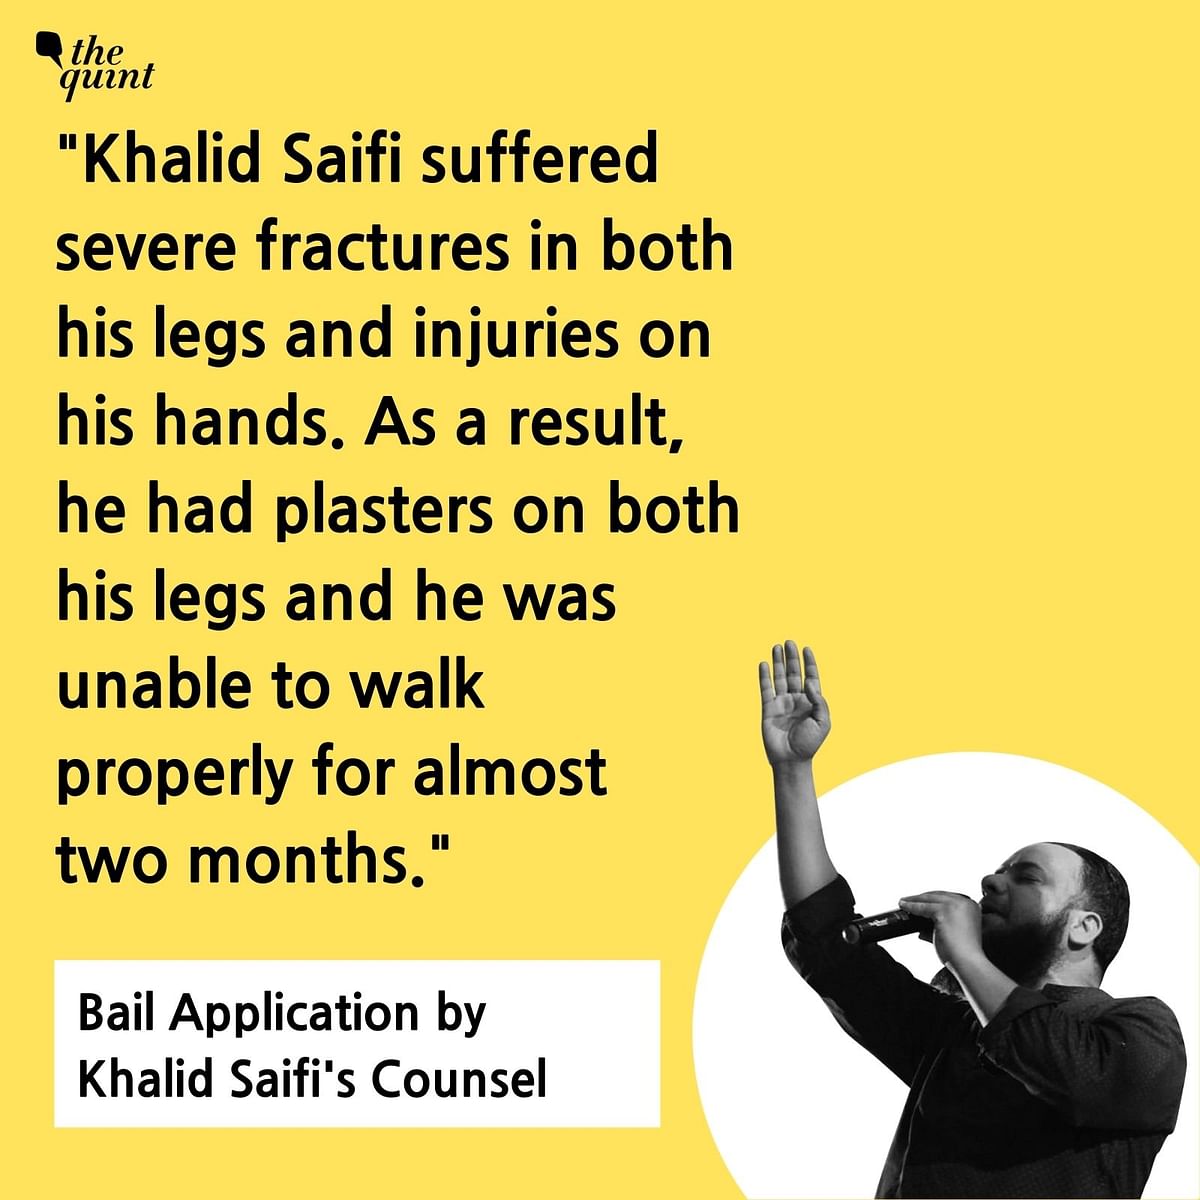 “Khalid’s beard had been plucked, he had nail marks on his forehead and plasters on both his legs,”his wife said.